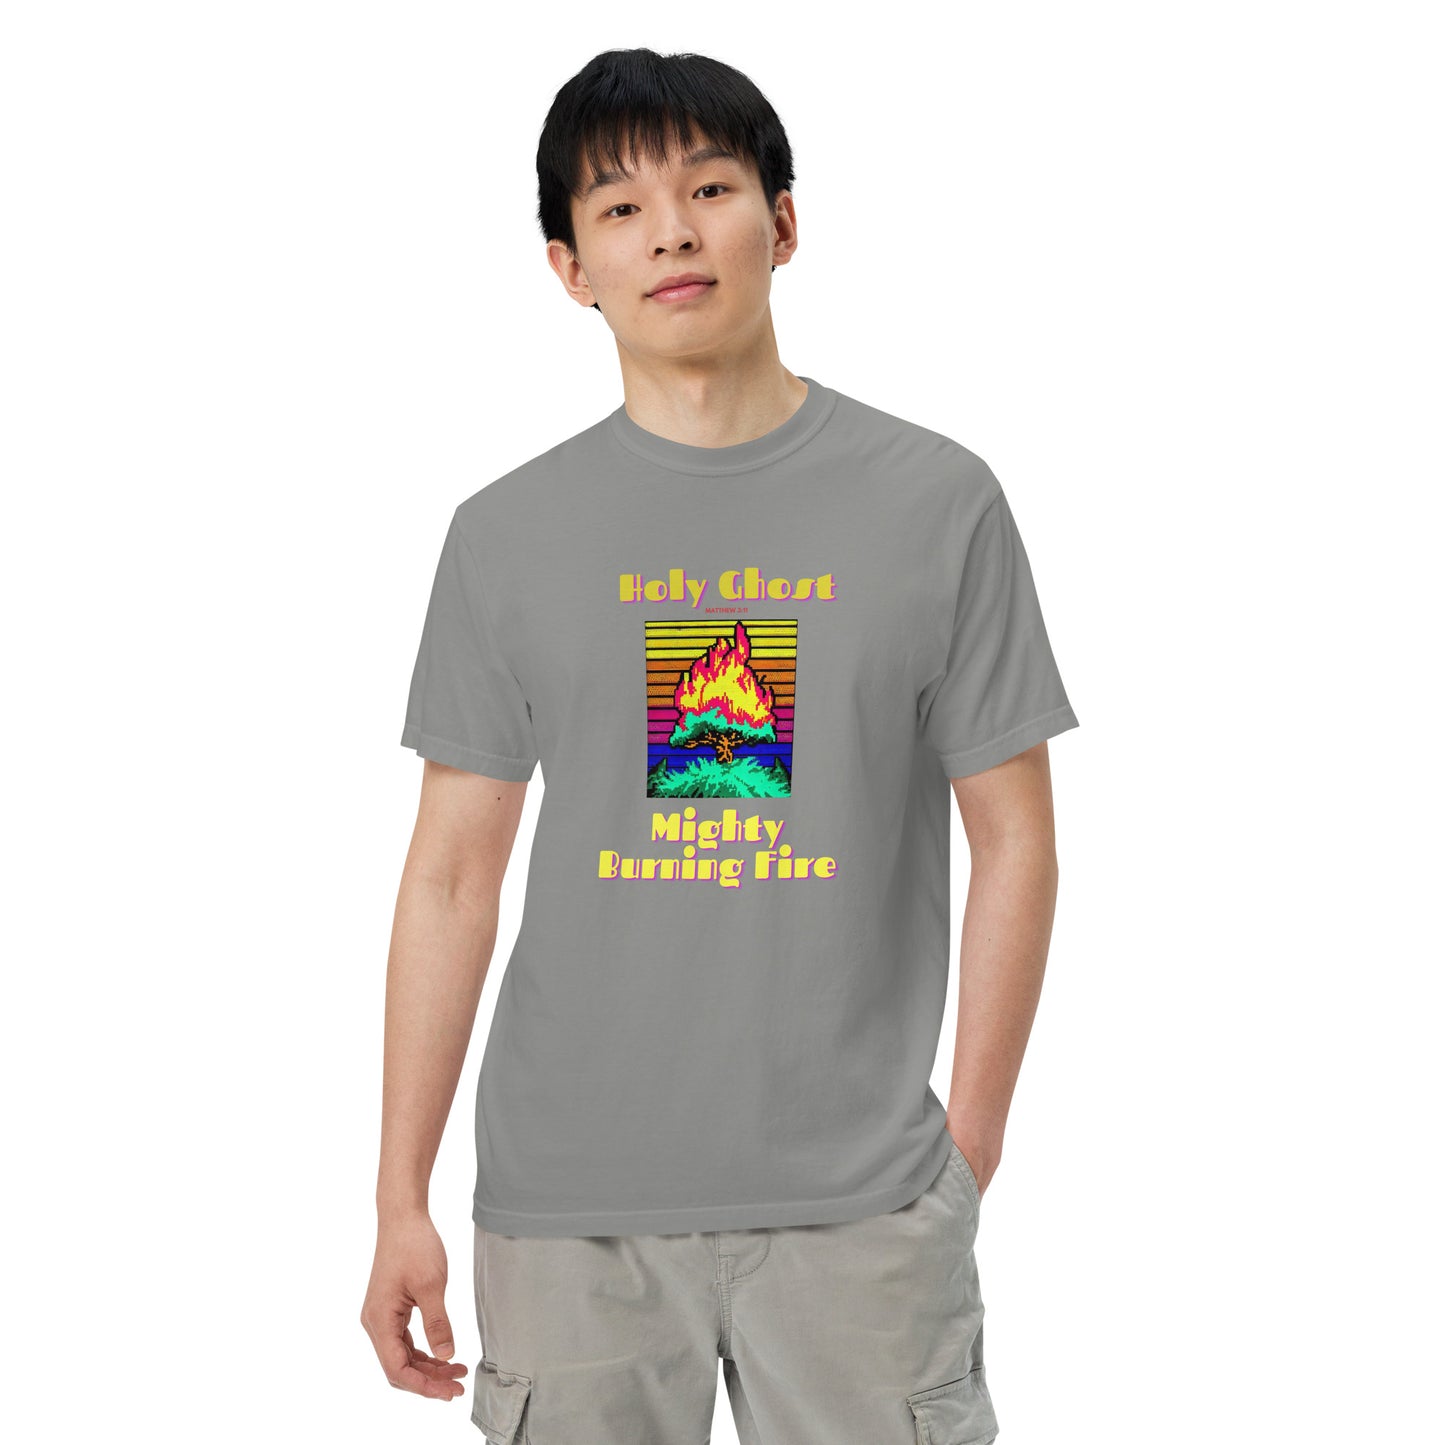 Holy Ghost Mighty Burning Fire Men’s Comfort Colors T-Shirt